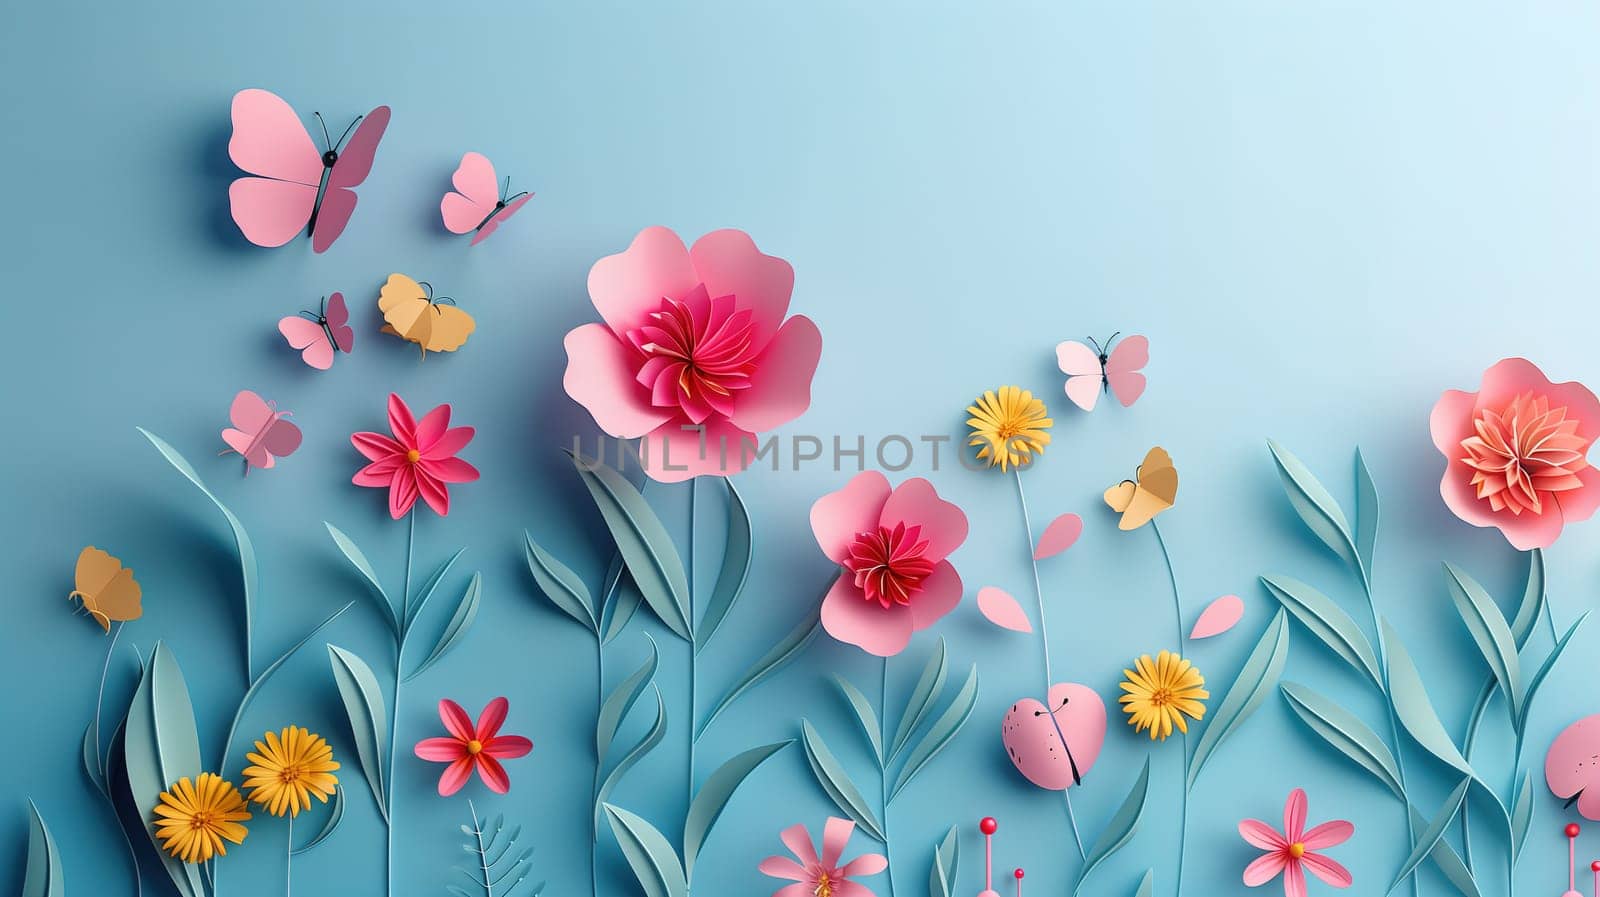 Colorful paper flowers and delicate butterflies are arranged on a vibrant blue background. The flowers are meticulously crafted with intricate details, creating a lively and cheerful scene.